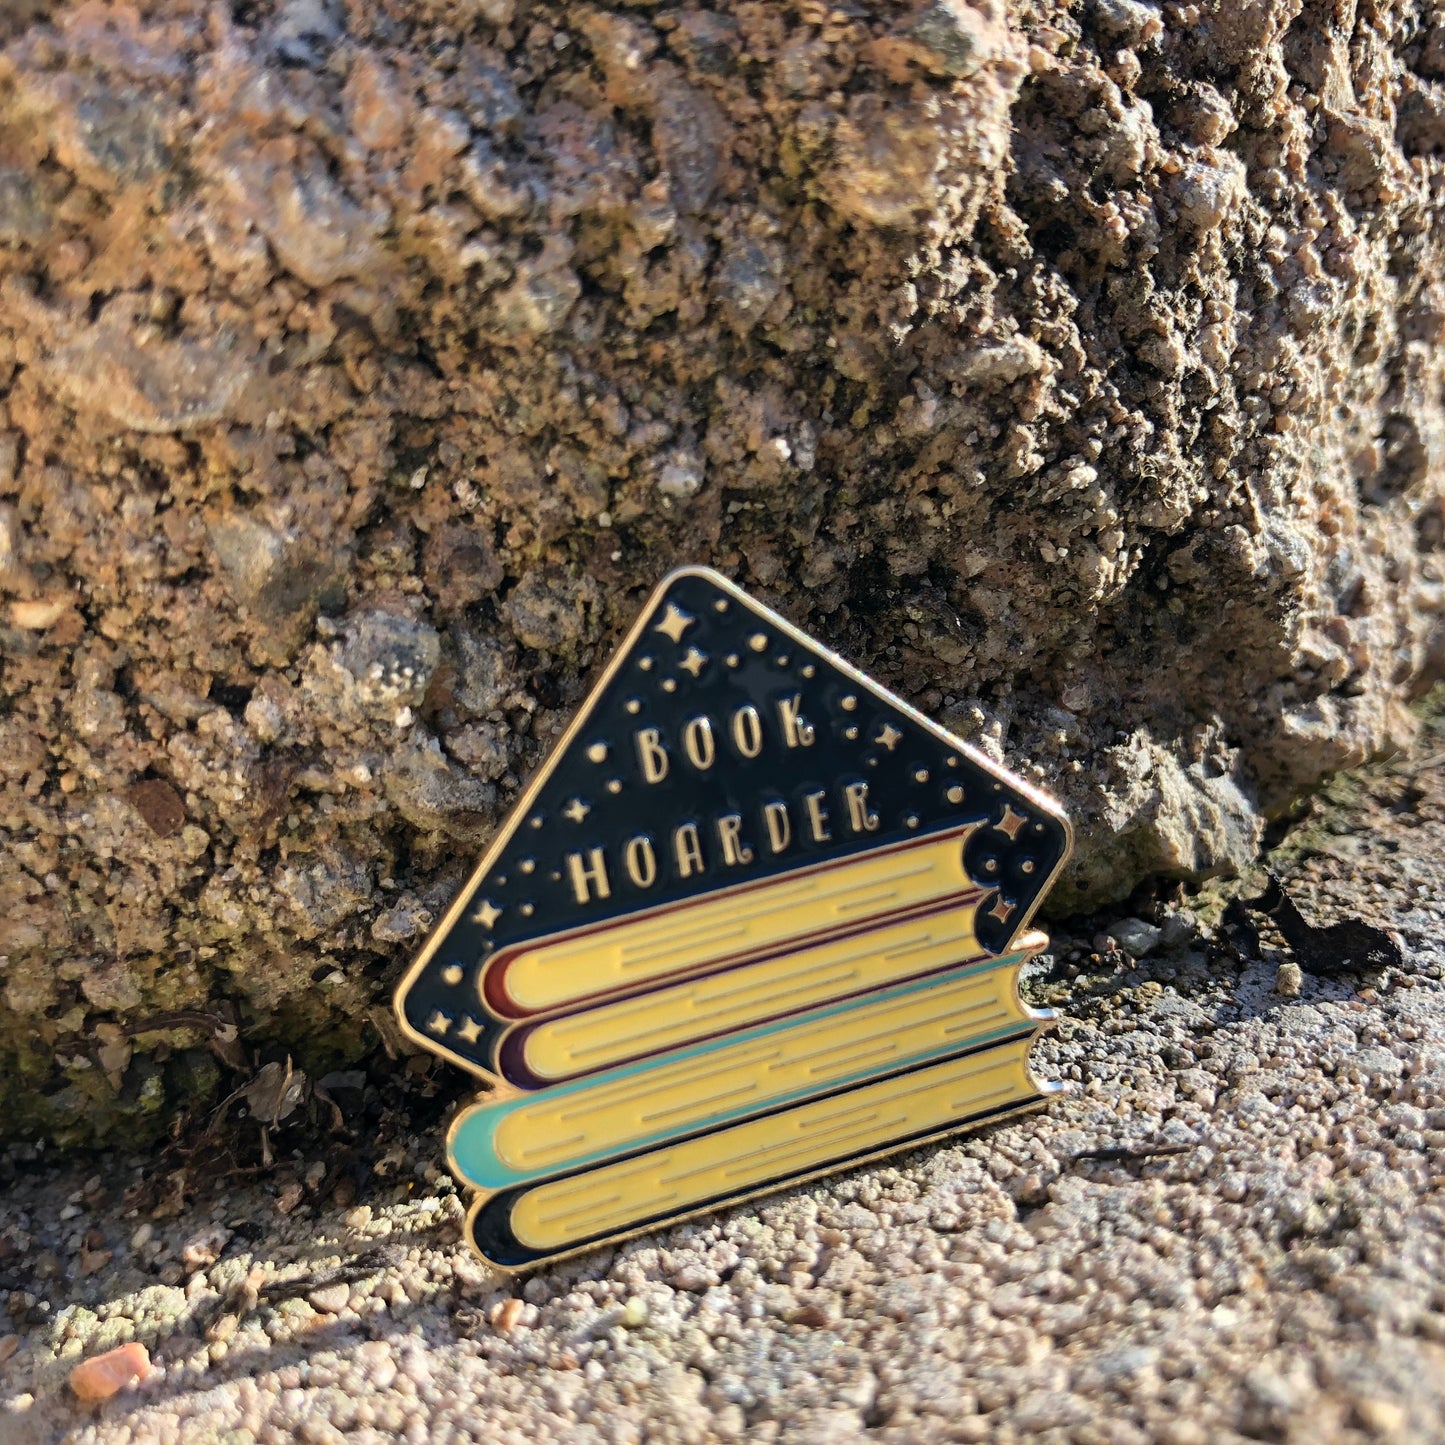 Discontinued Book Hoarder Gold Plated Soft Enamel Lapel Pin